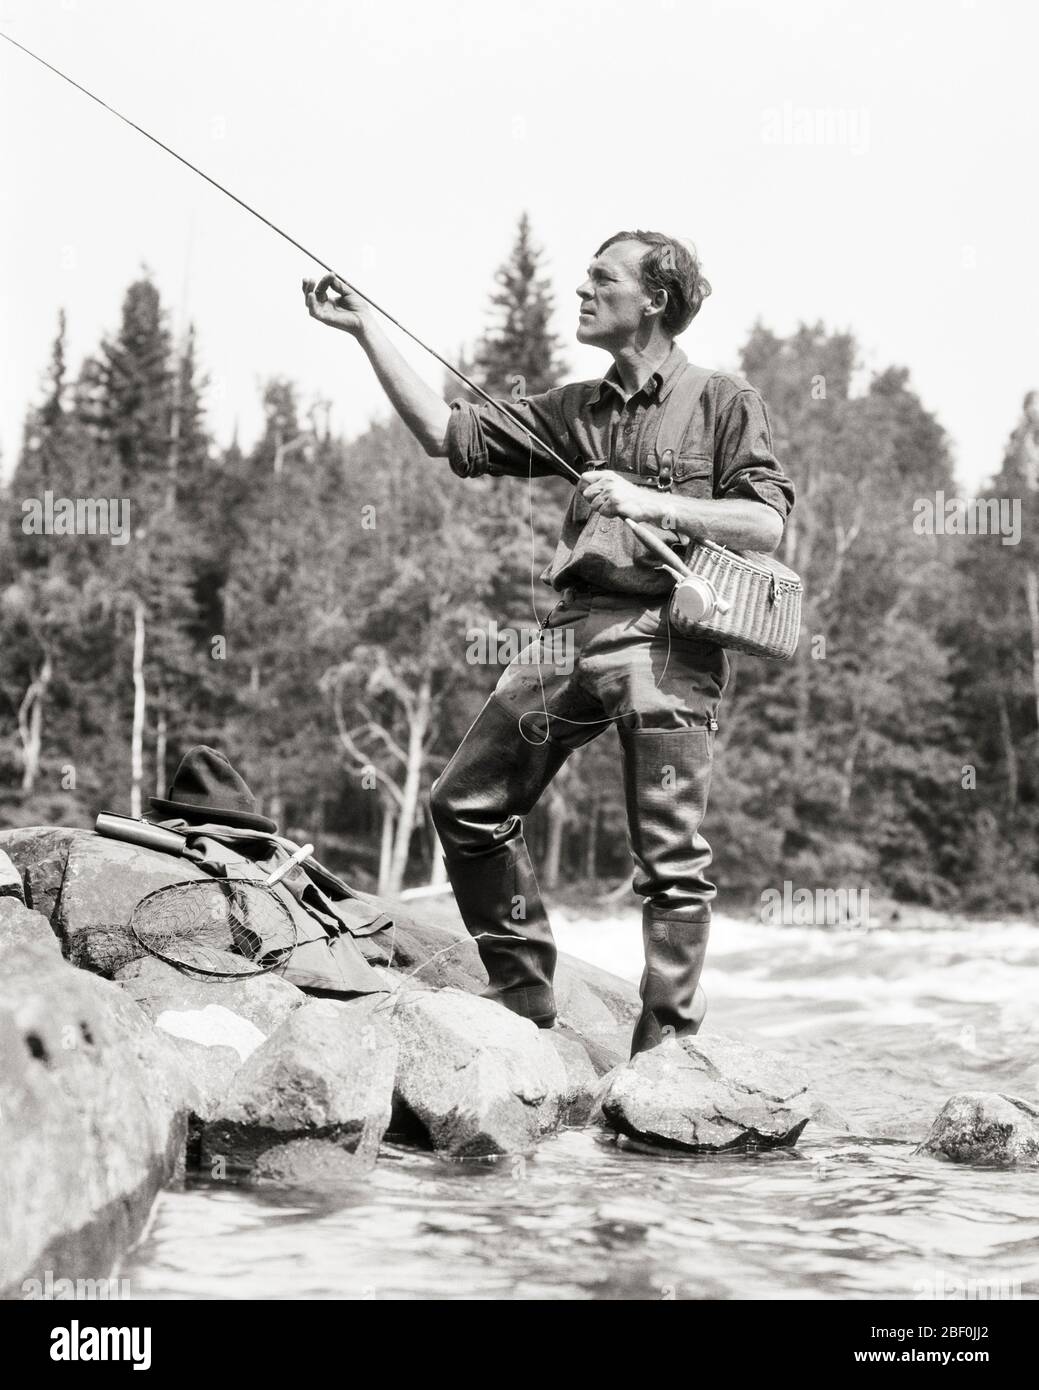 1920s FISHERMAN ADJUSTING HIS FISHING ROD BEFORE CASTING IN STREAM